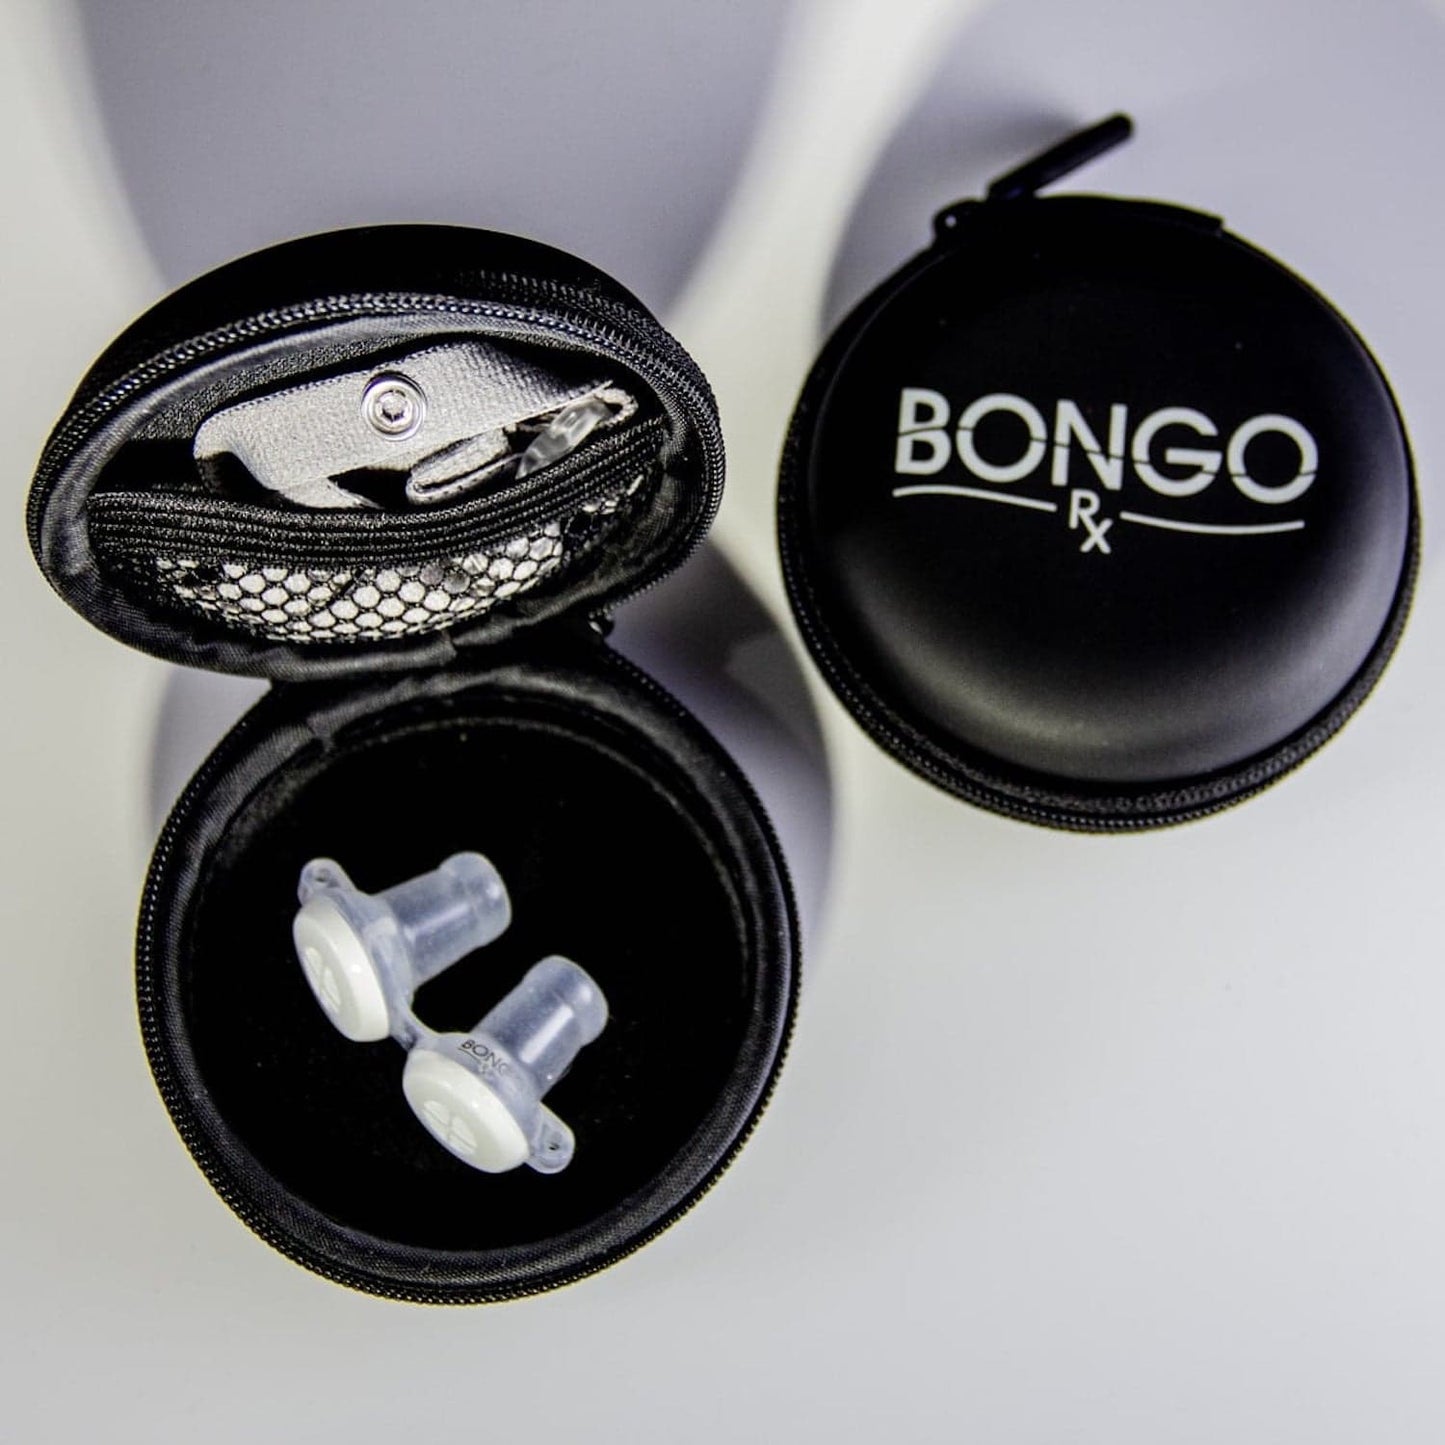 Bongo Rx - Sleep Therapy Device, travel case opened & closed